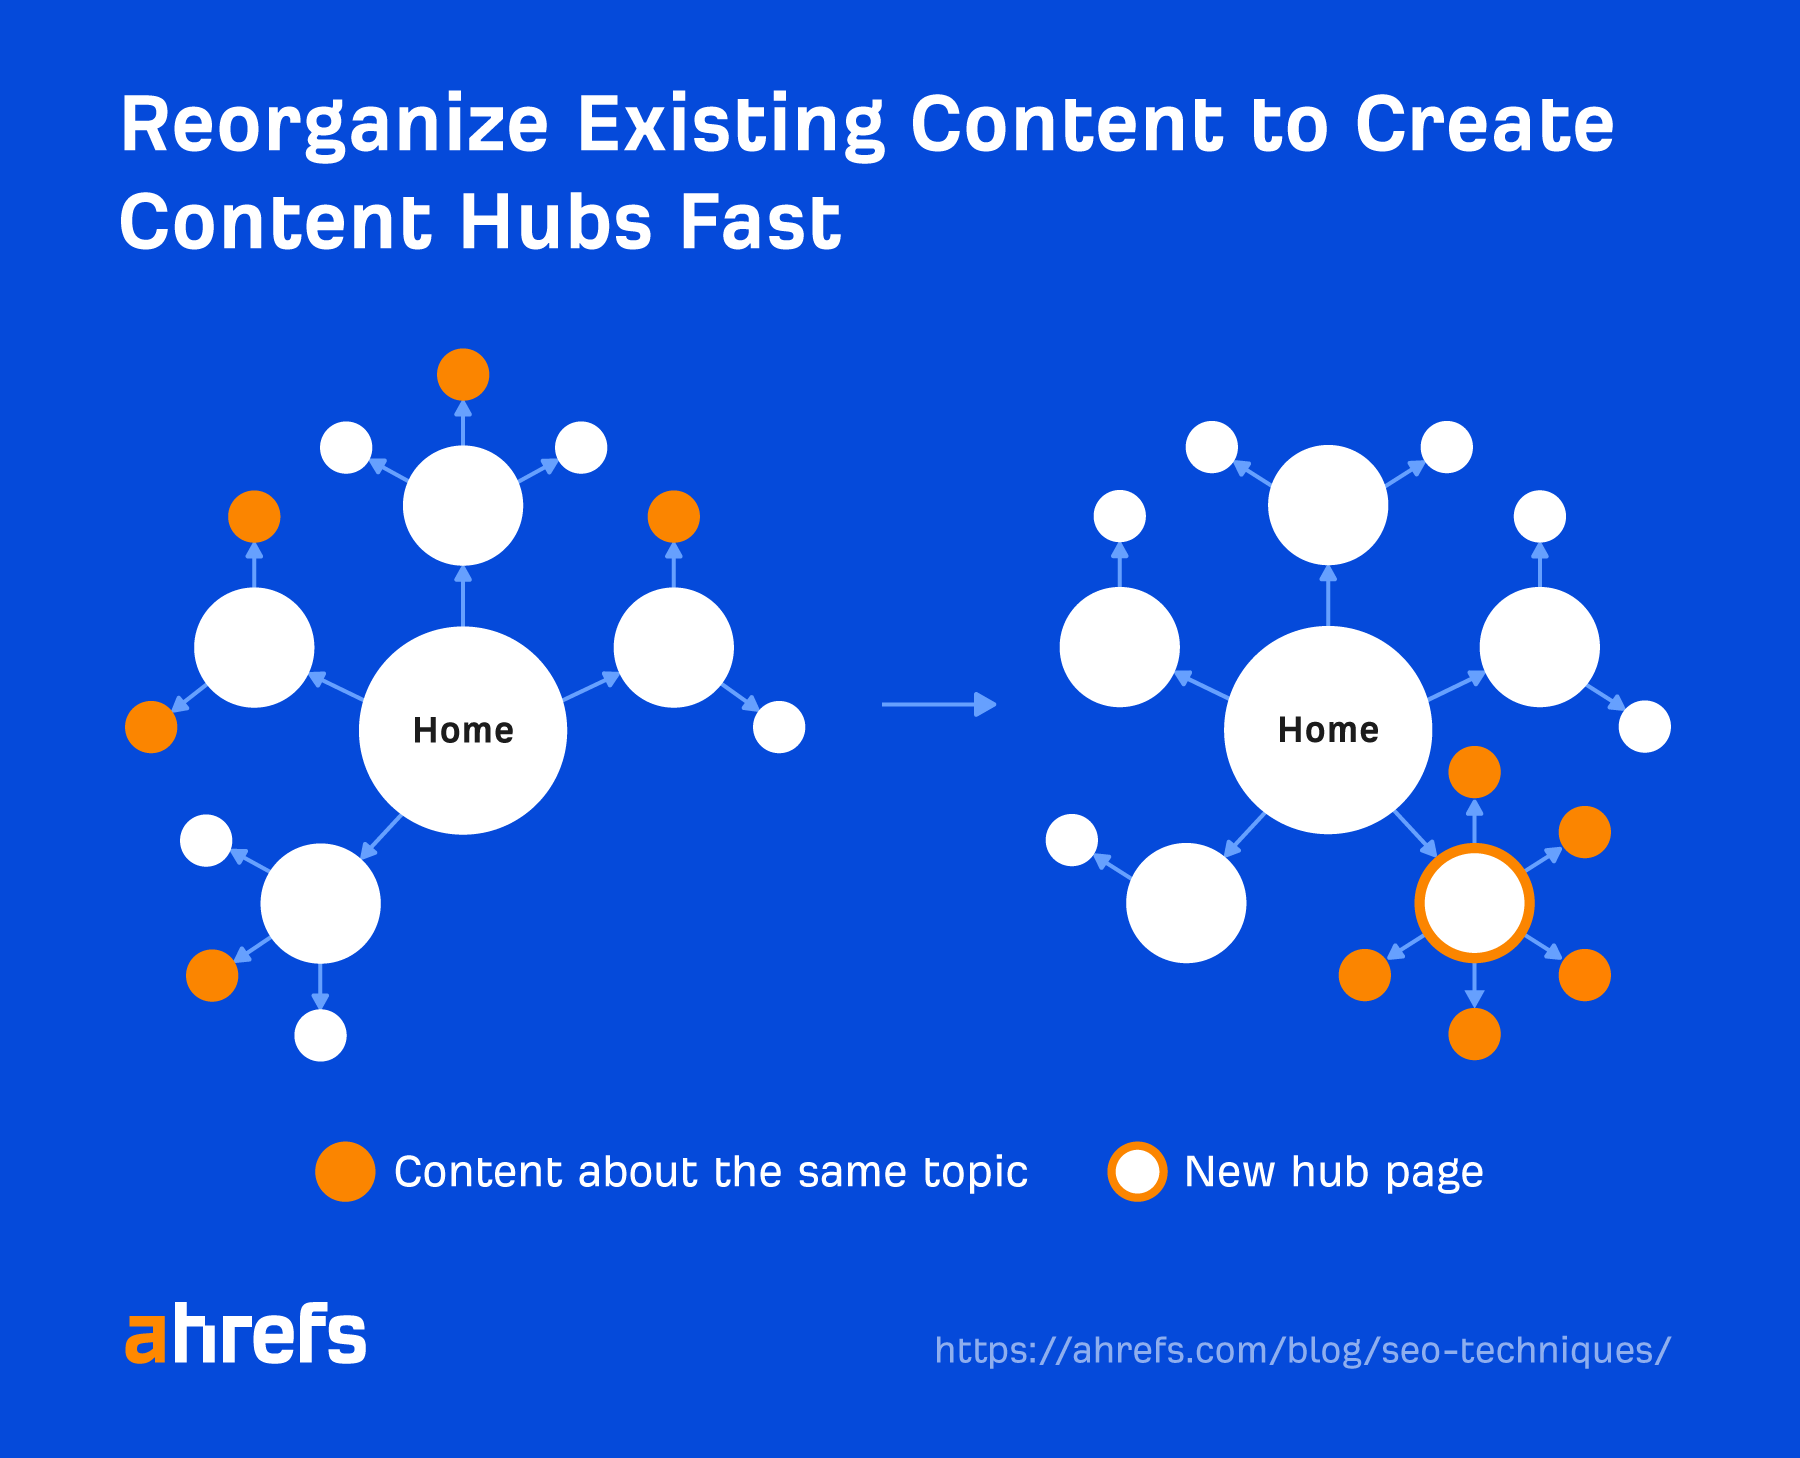 Flowchart showing how existing content can be reorganized